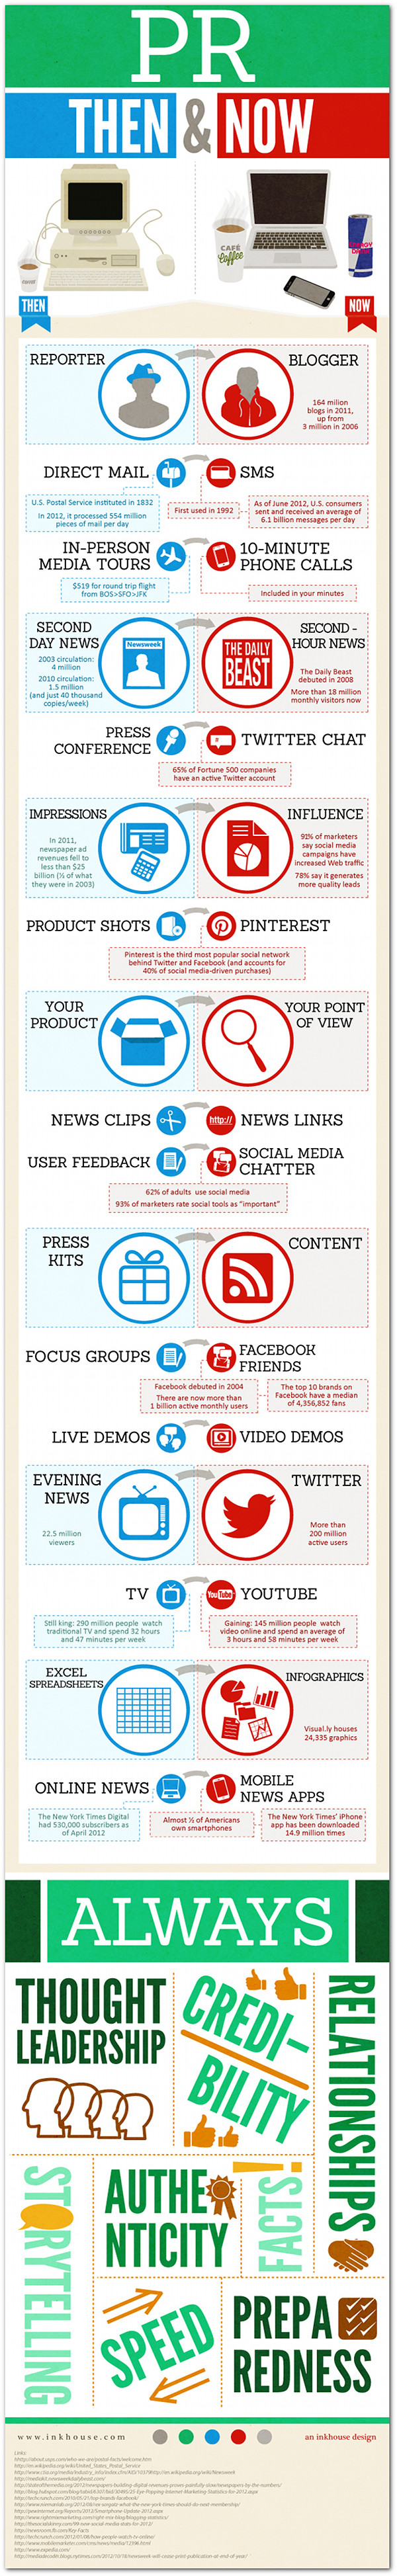 pr then and now infographic public relations trends 2013